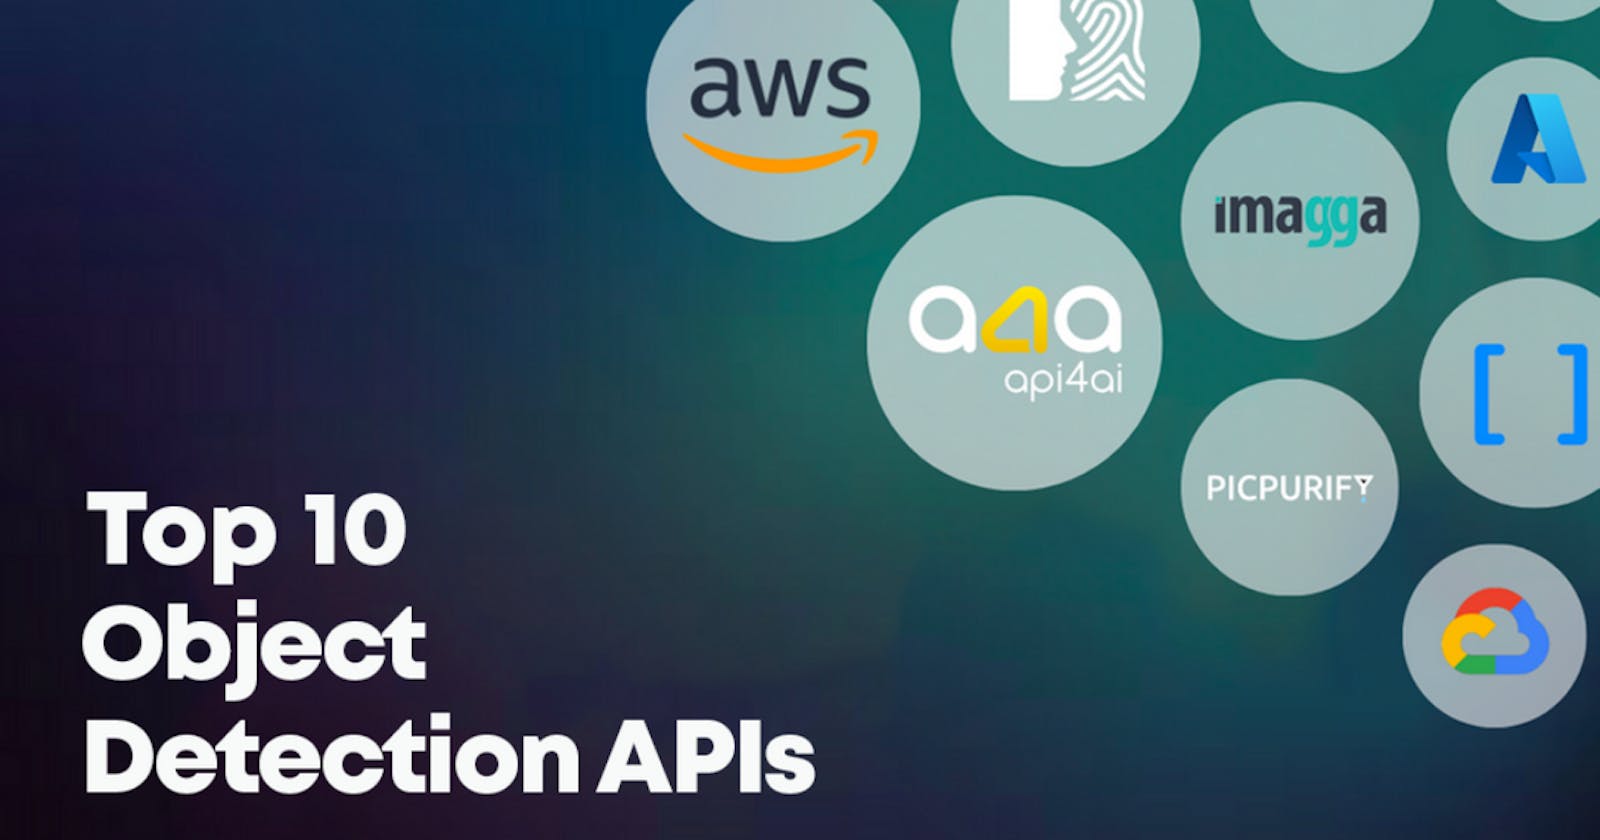 Top 10 Object Detection APIs